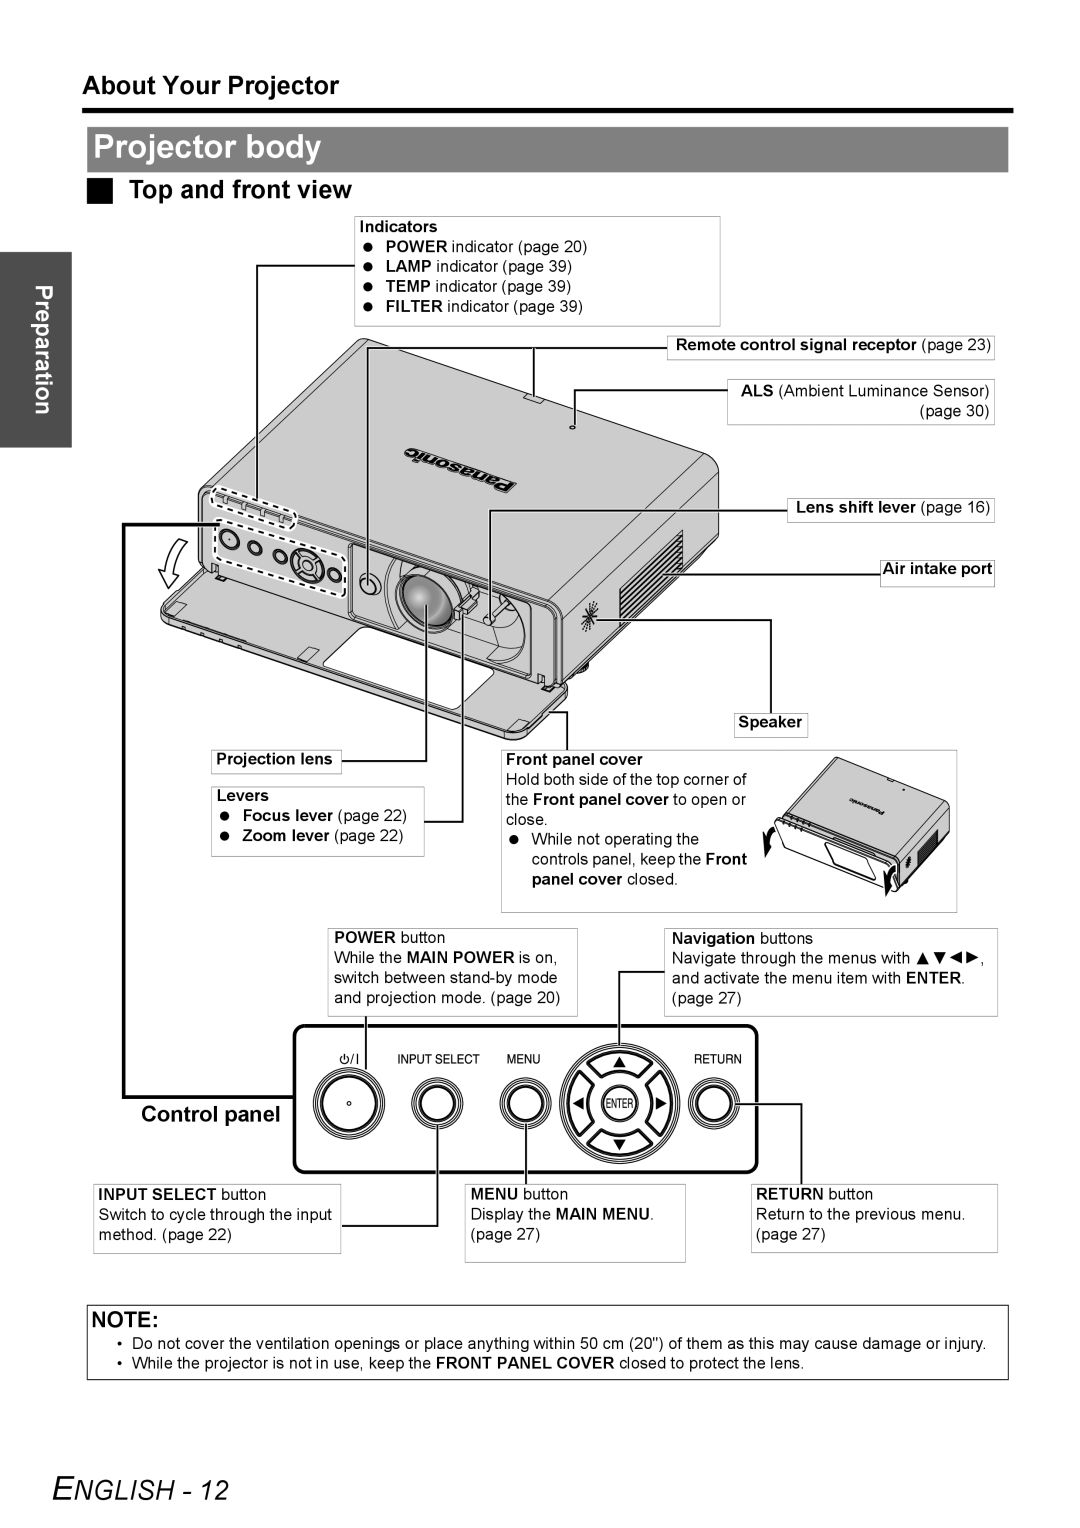 Panasonic PT-FW100NTU manual Projector body, About Your Projector, Top and front view, Control panel, English, Preparation 